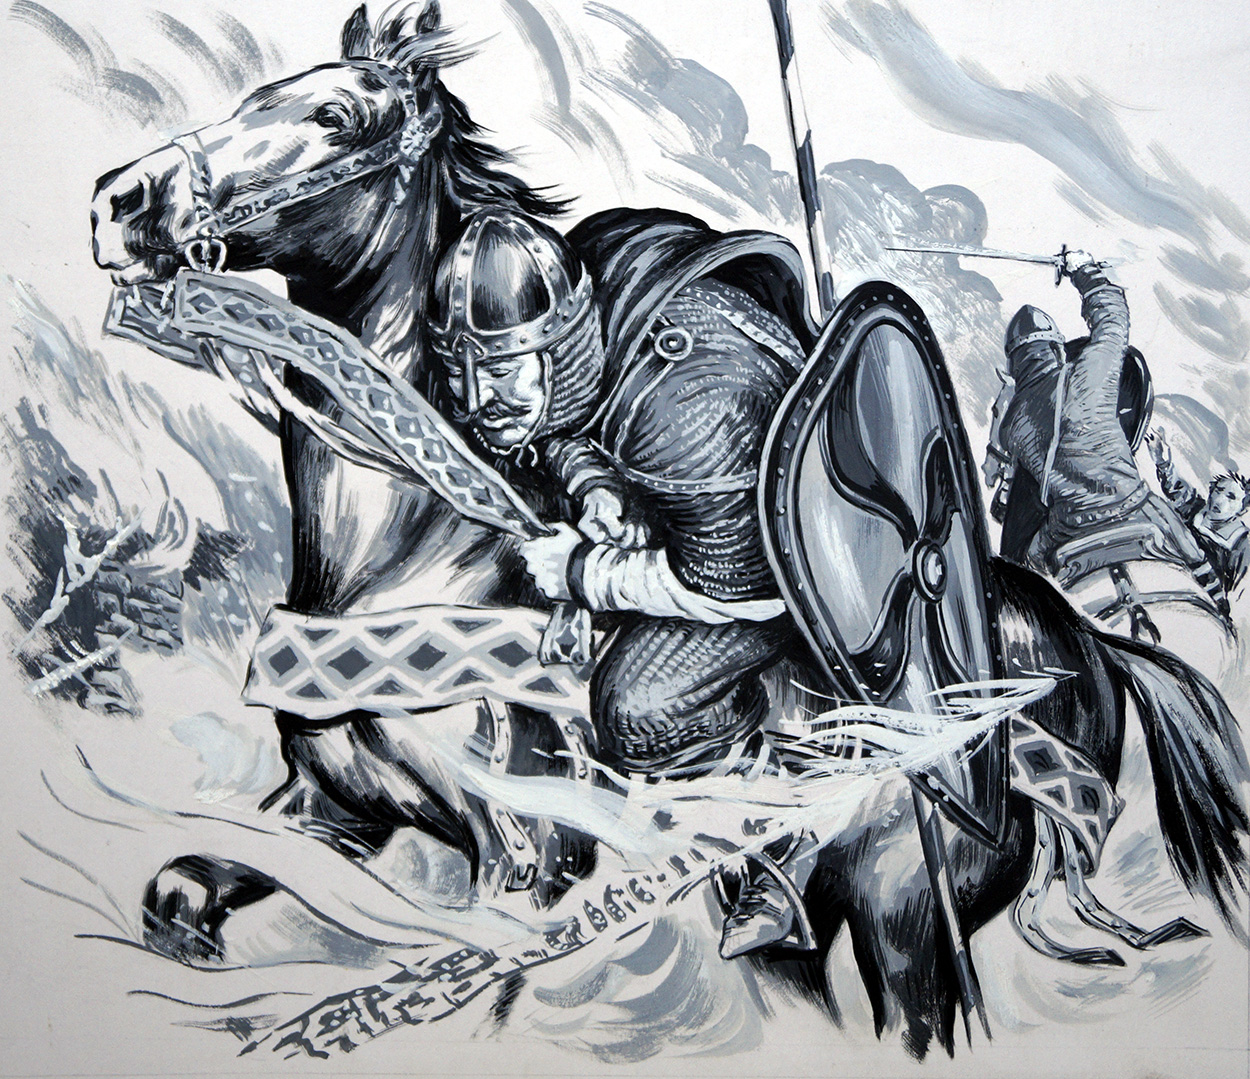 The Death of William the Conqueror (Original) art by F R Exell at The Illustration Art Gallery